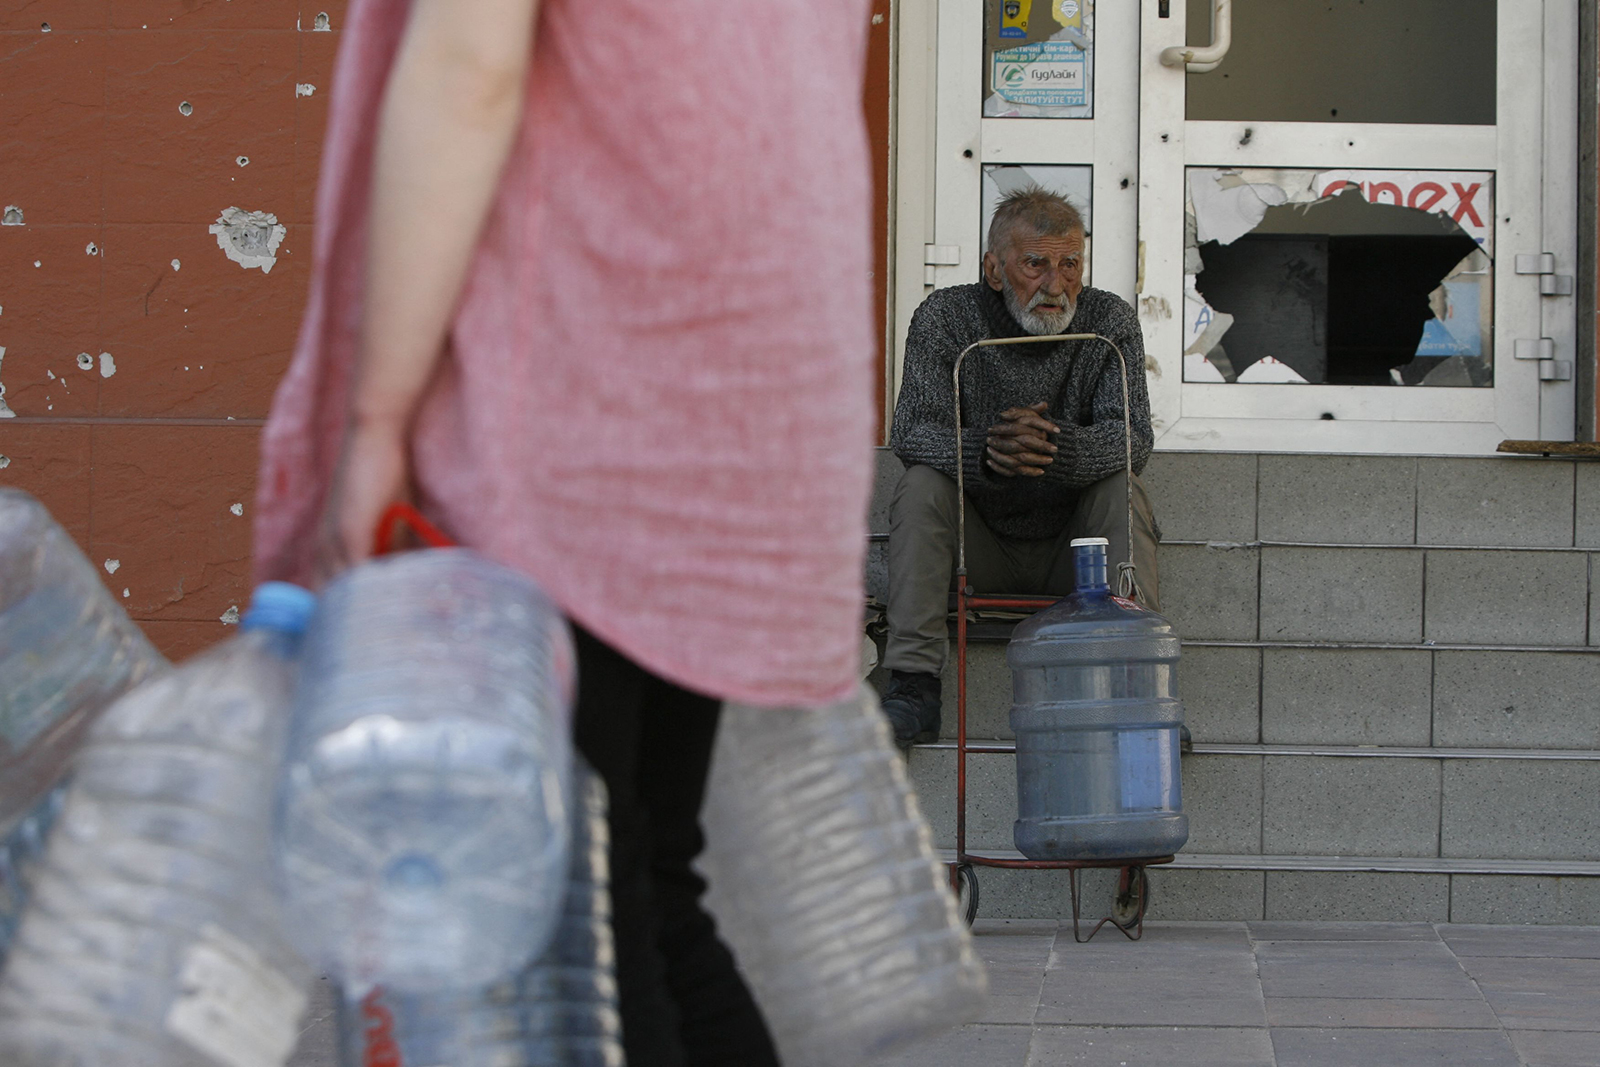 A man waits to get water in Mariupol on May 30, amid the ongoing Russian military action in Ukraine.